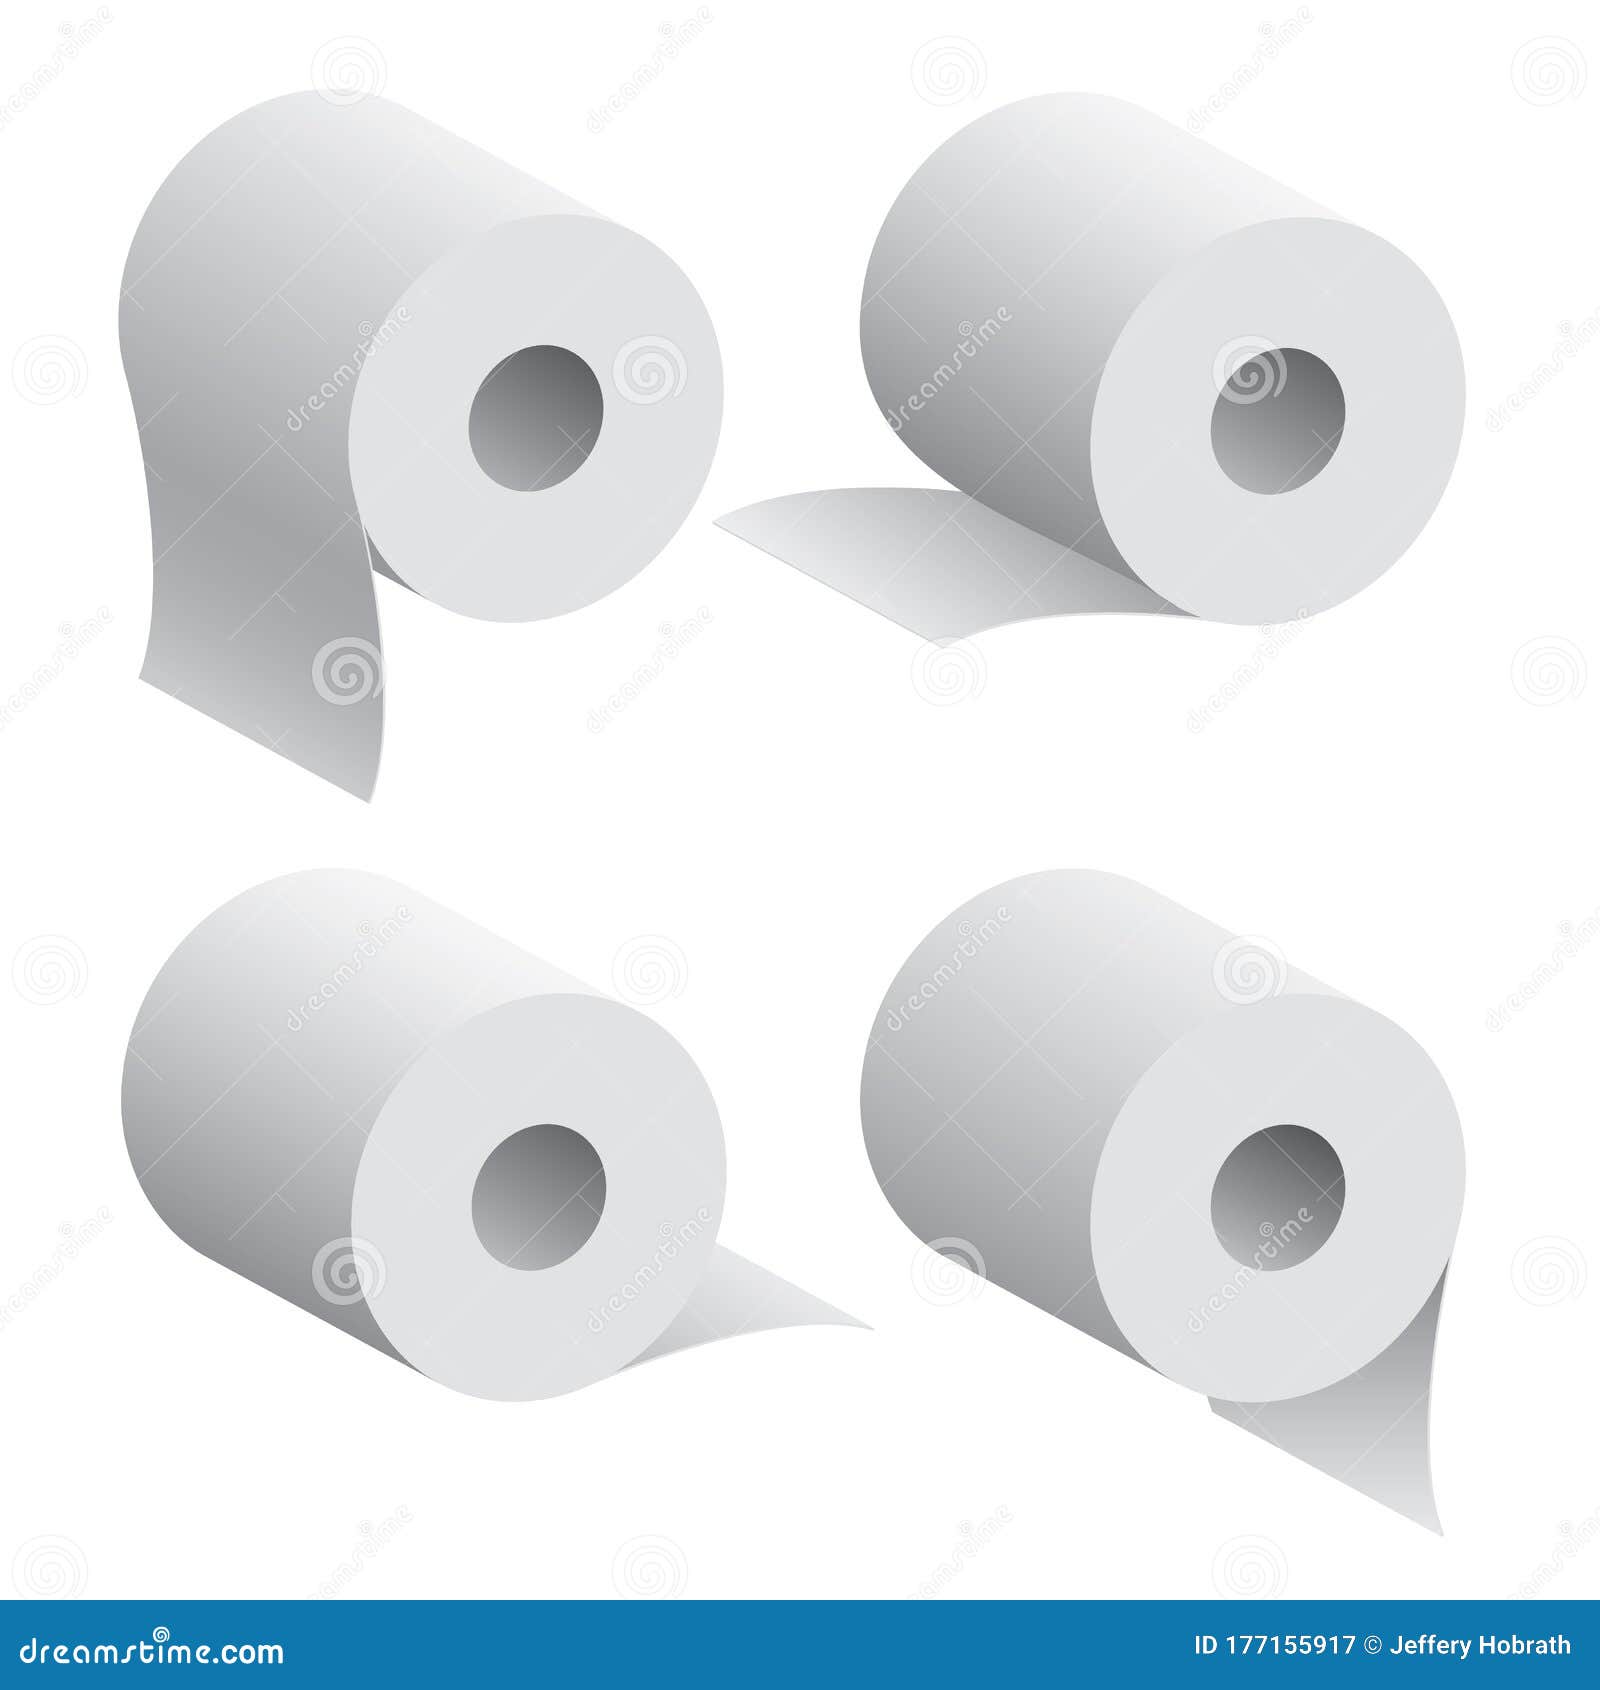 Toilet Paper Rolls Realistic 3D Isolated Vector